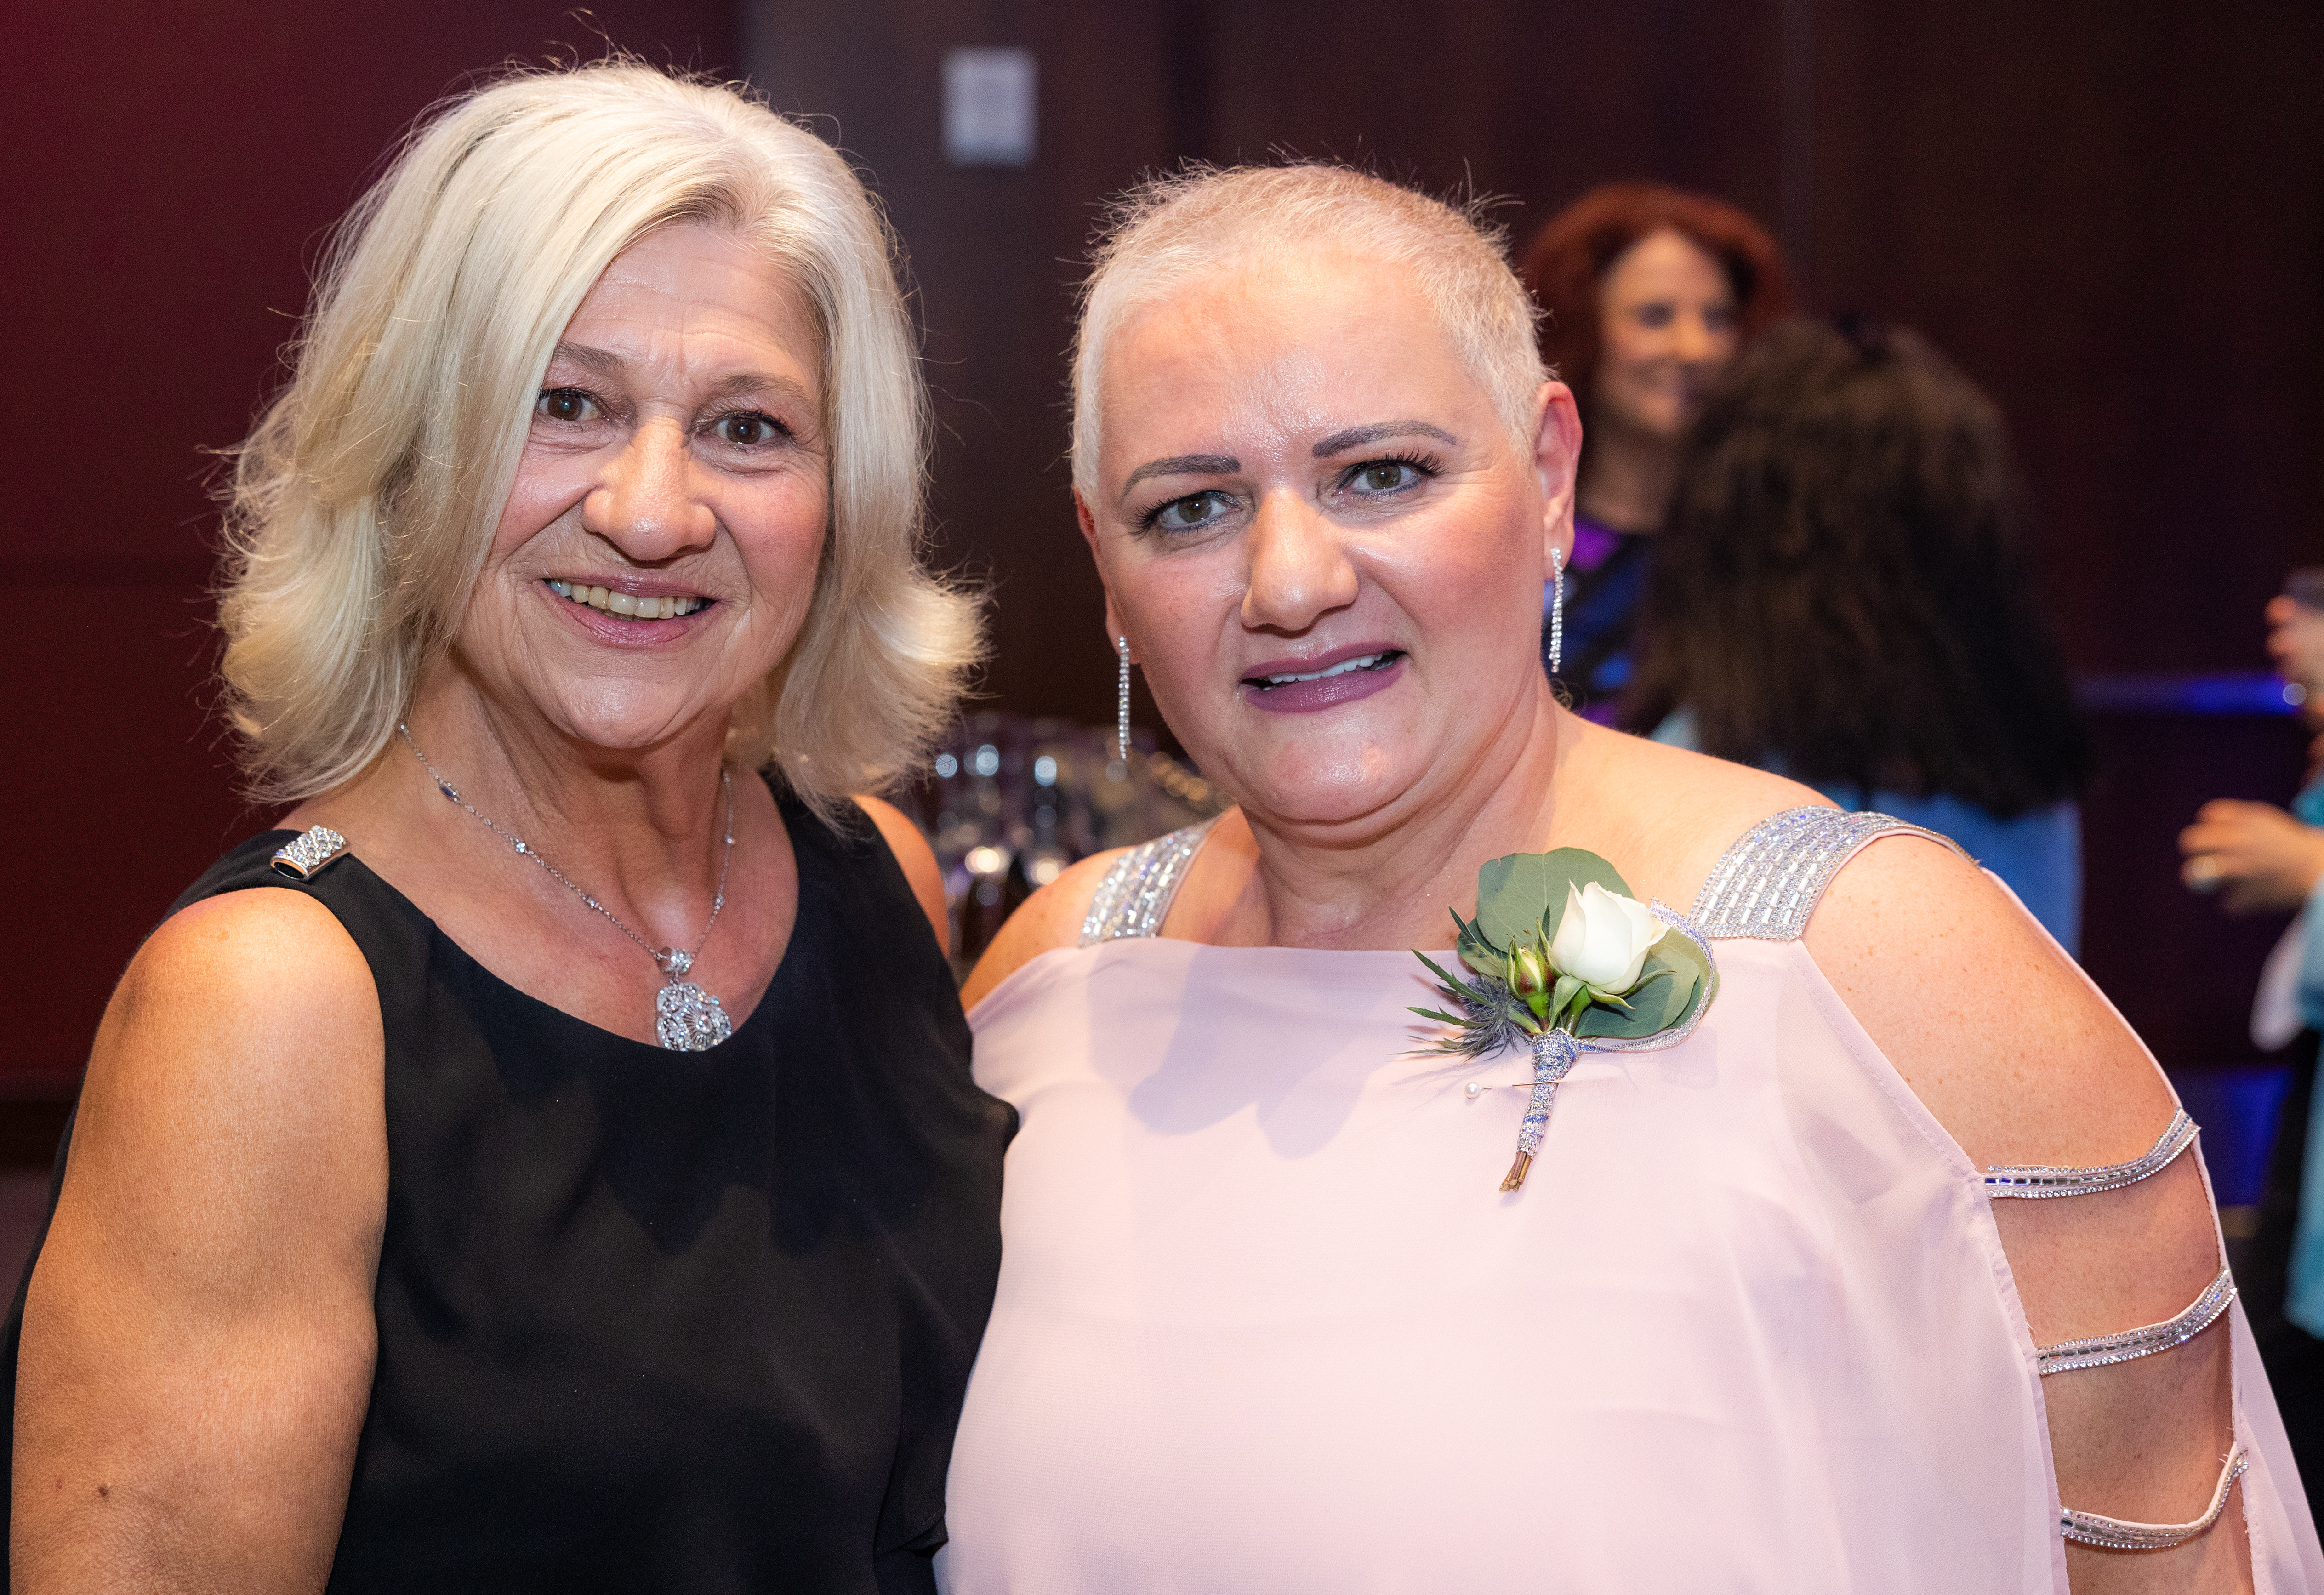 Finalists and sisters-in-law Maria Lepage and Silvana Cardaropoli, a Howdy Award winner, at the 25th annual Howdy Awards for Hospitality Excellence held at the MassMutual Center Monday evening, May 16, 2022. (Hoang ‘Leon’ Nguyen / The Republican)